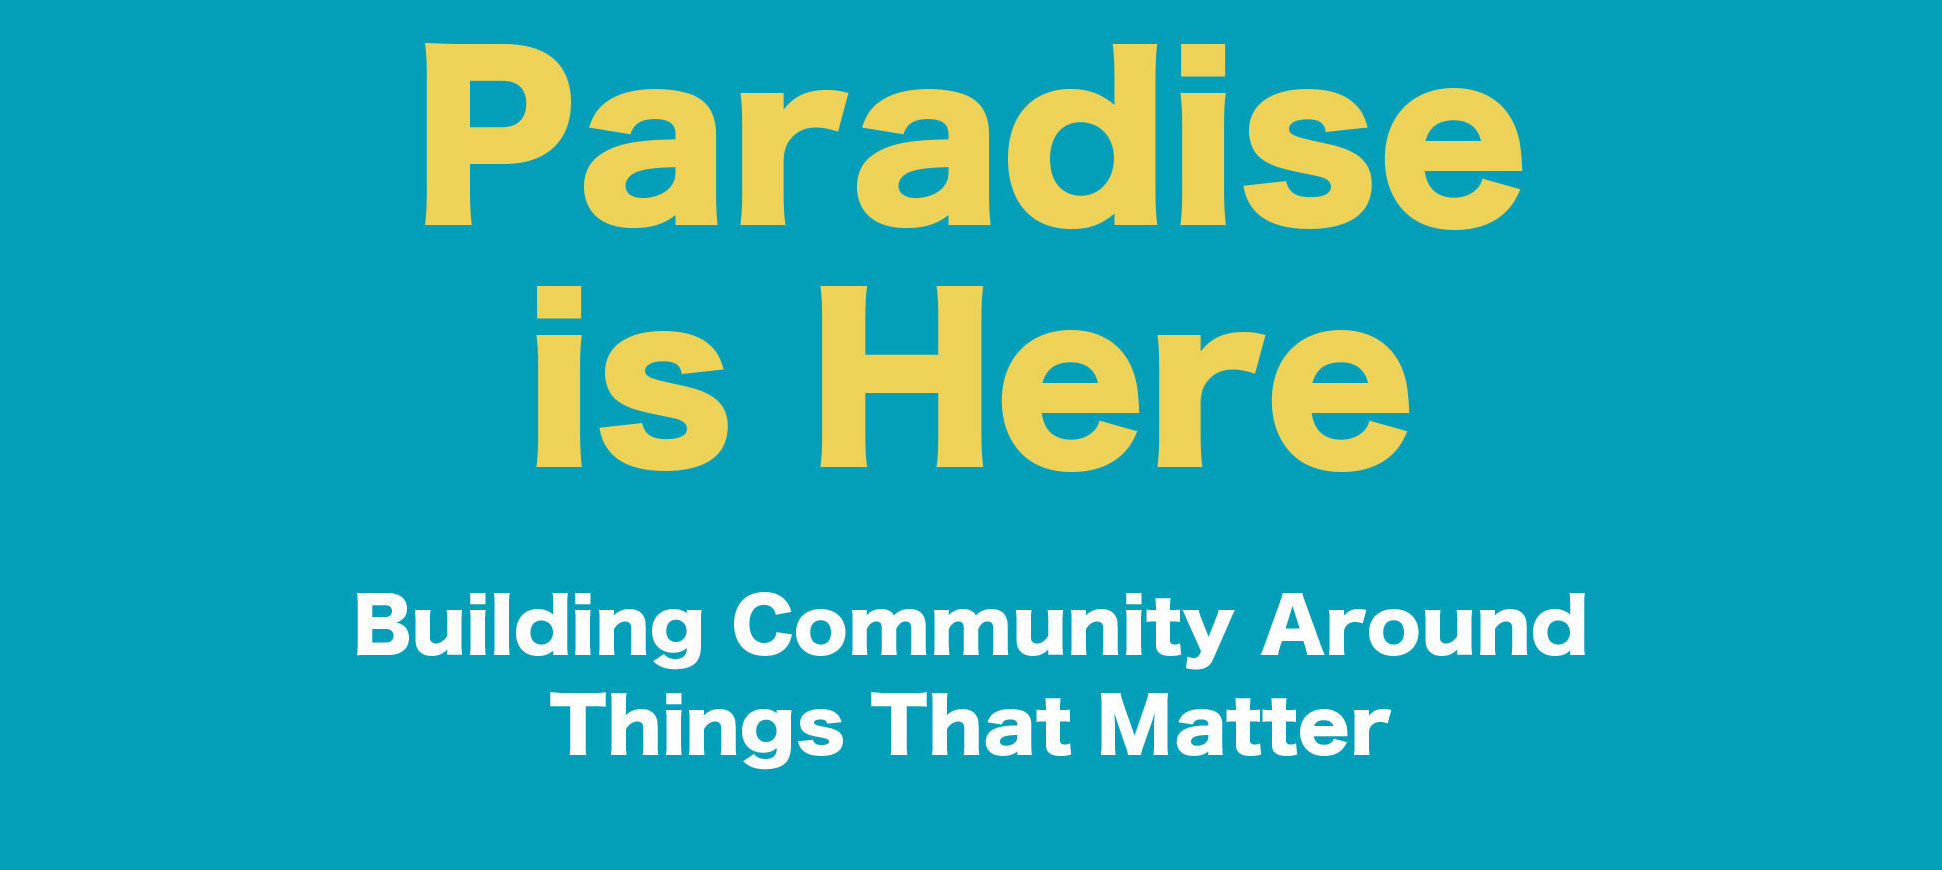 Paradise cover cropped for website banner.jpeg